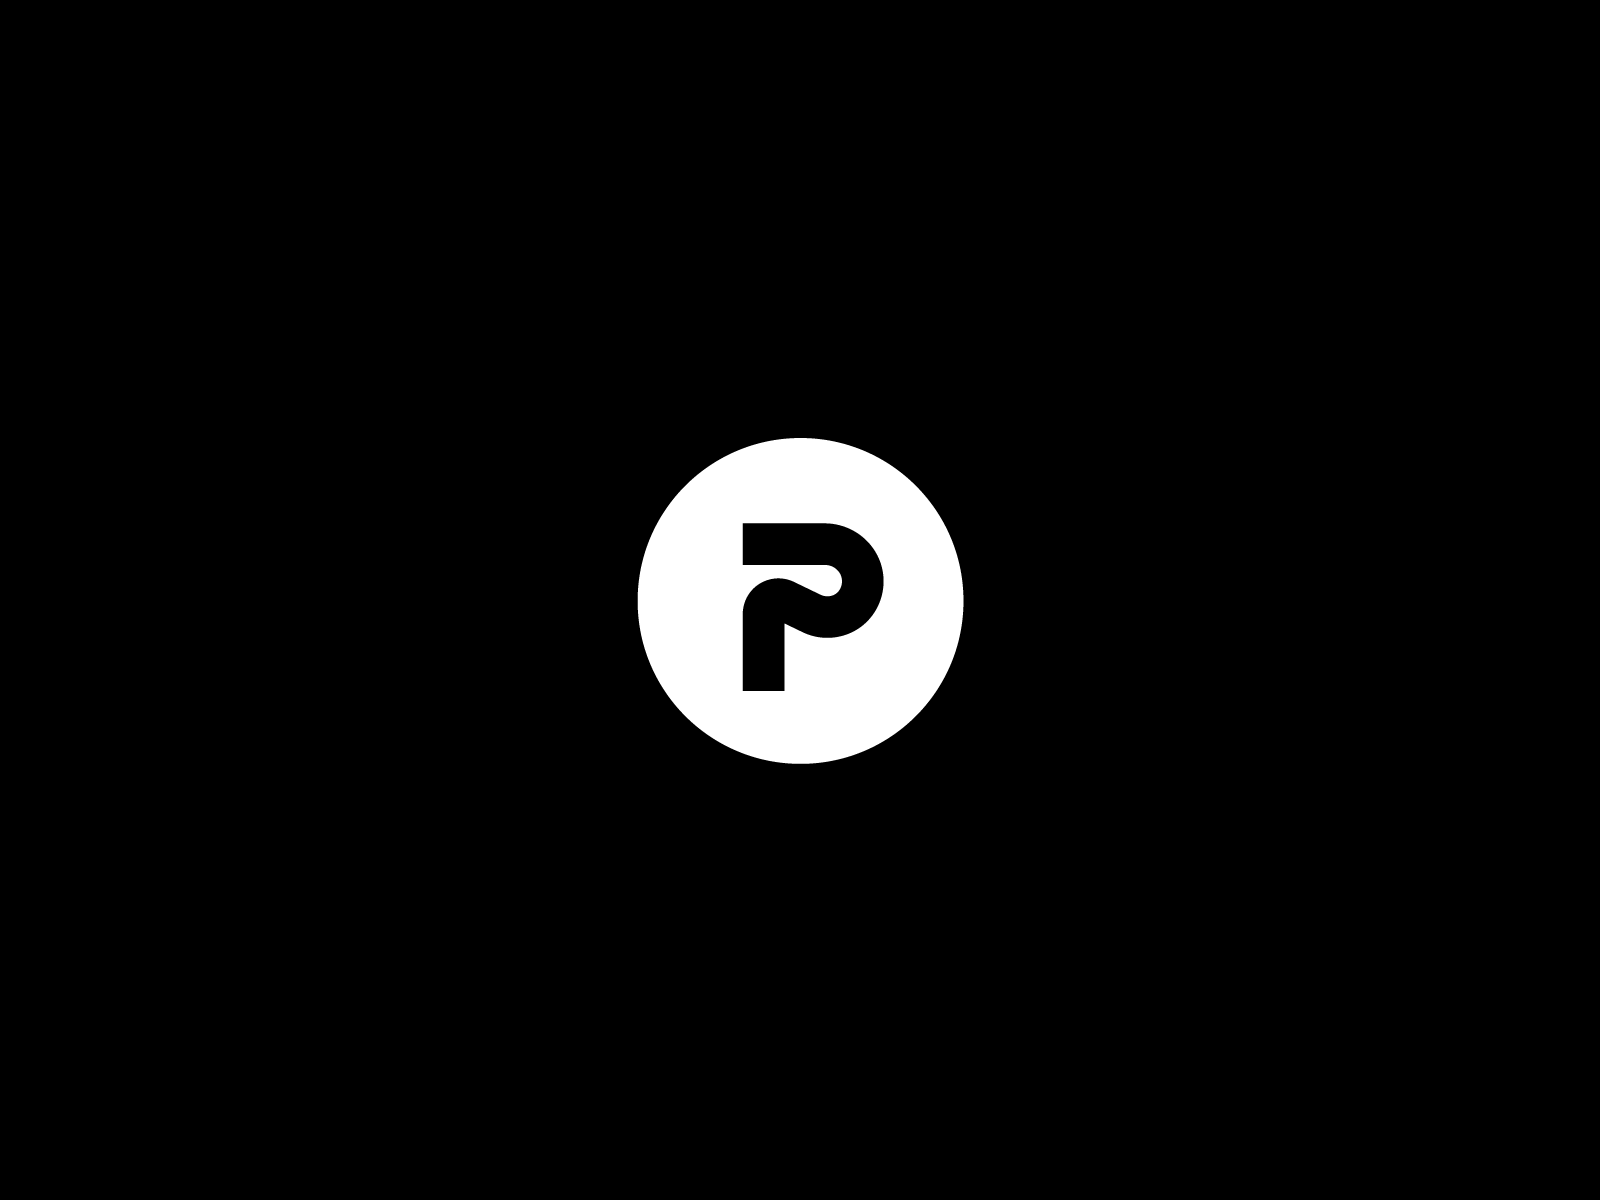 P by Jess Aguilera on Dribbble